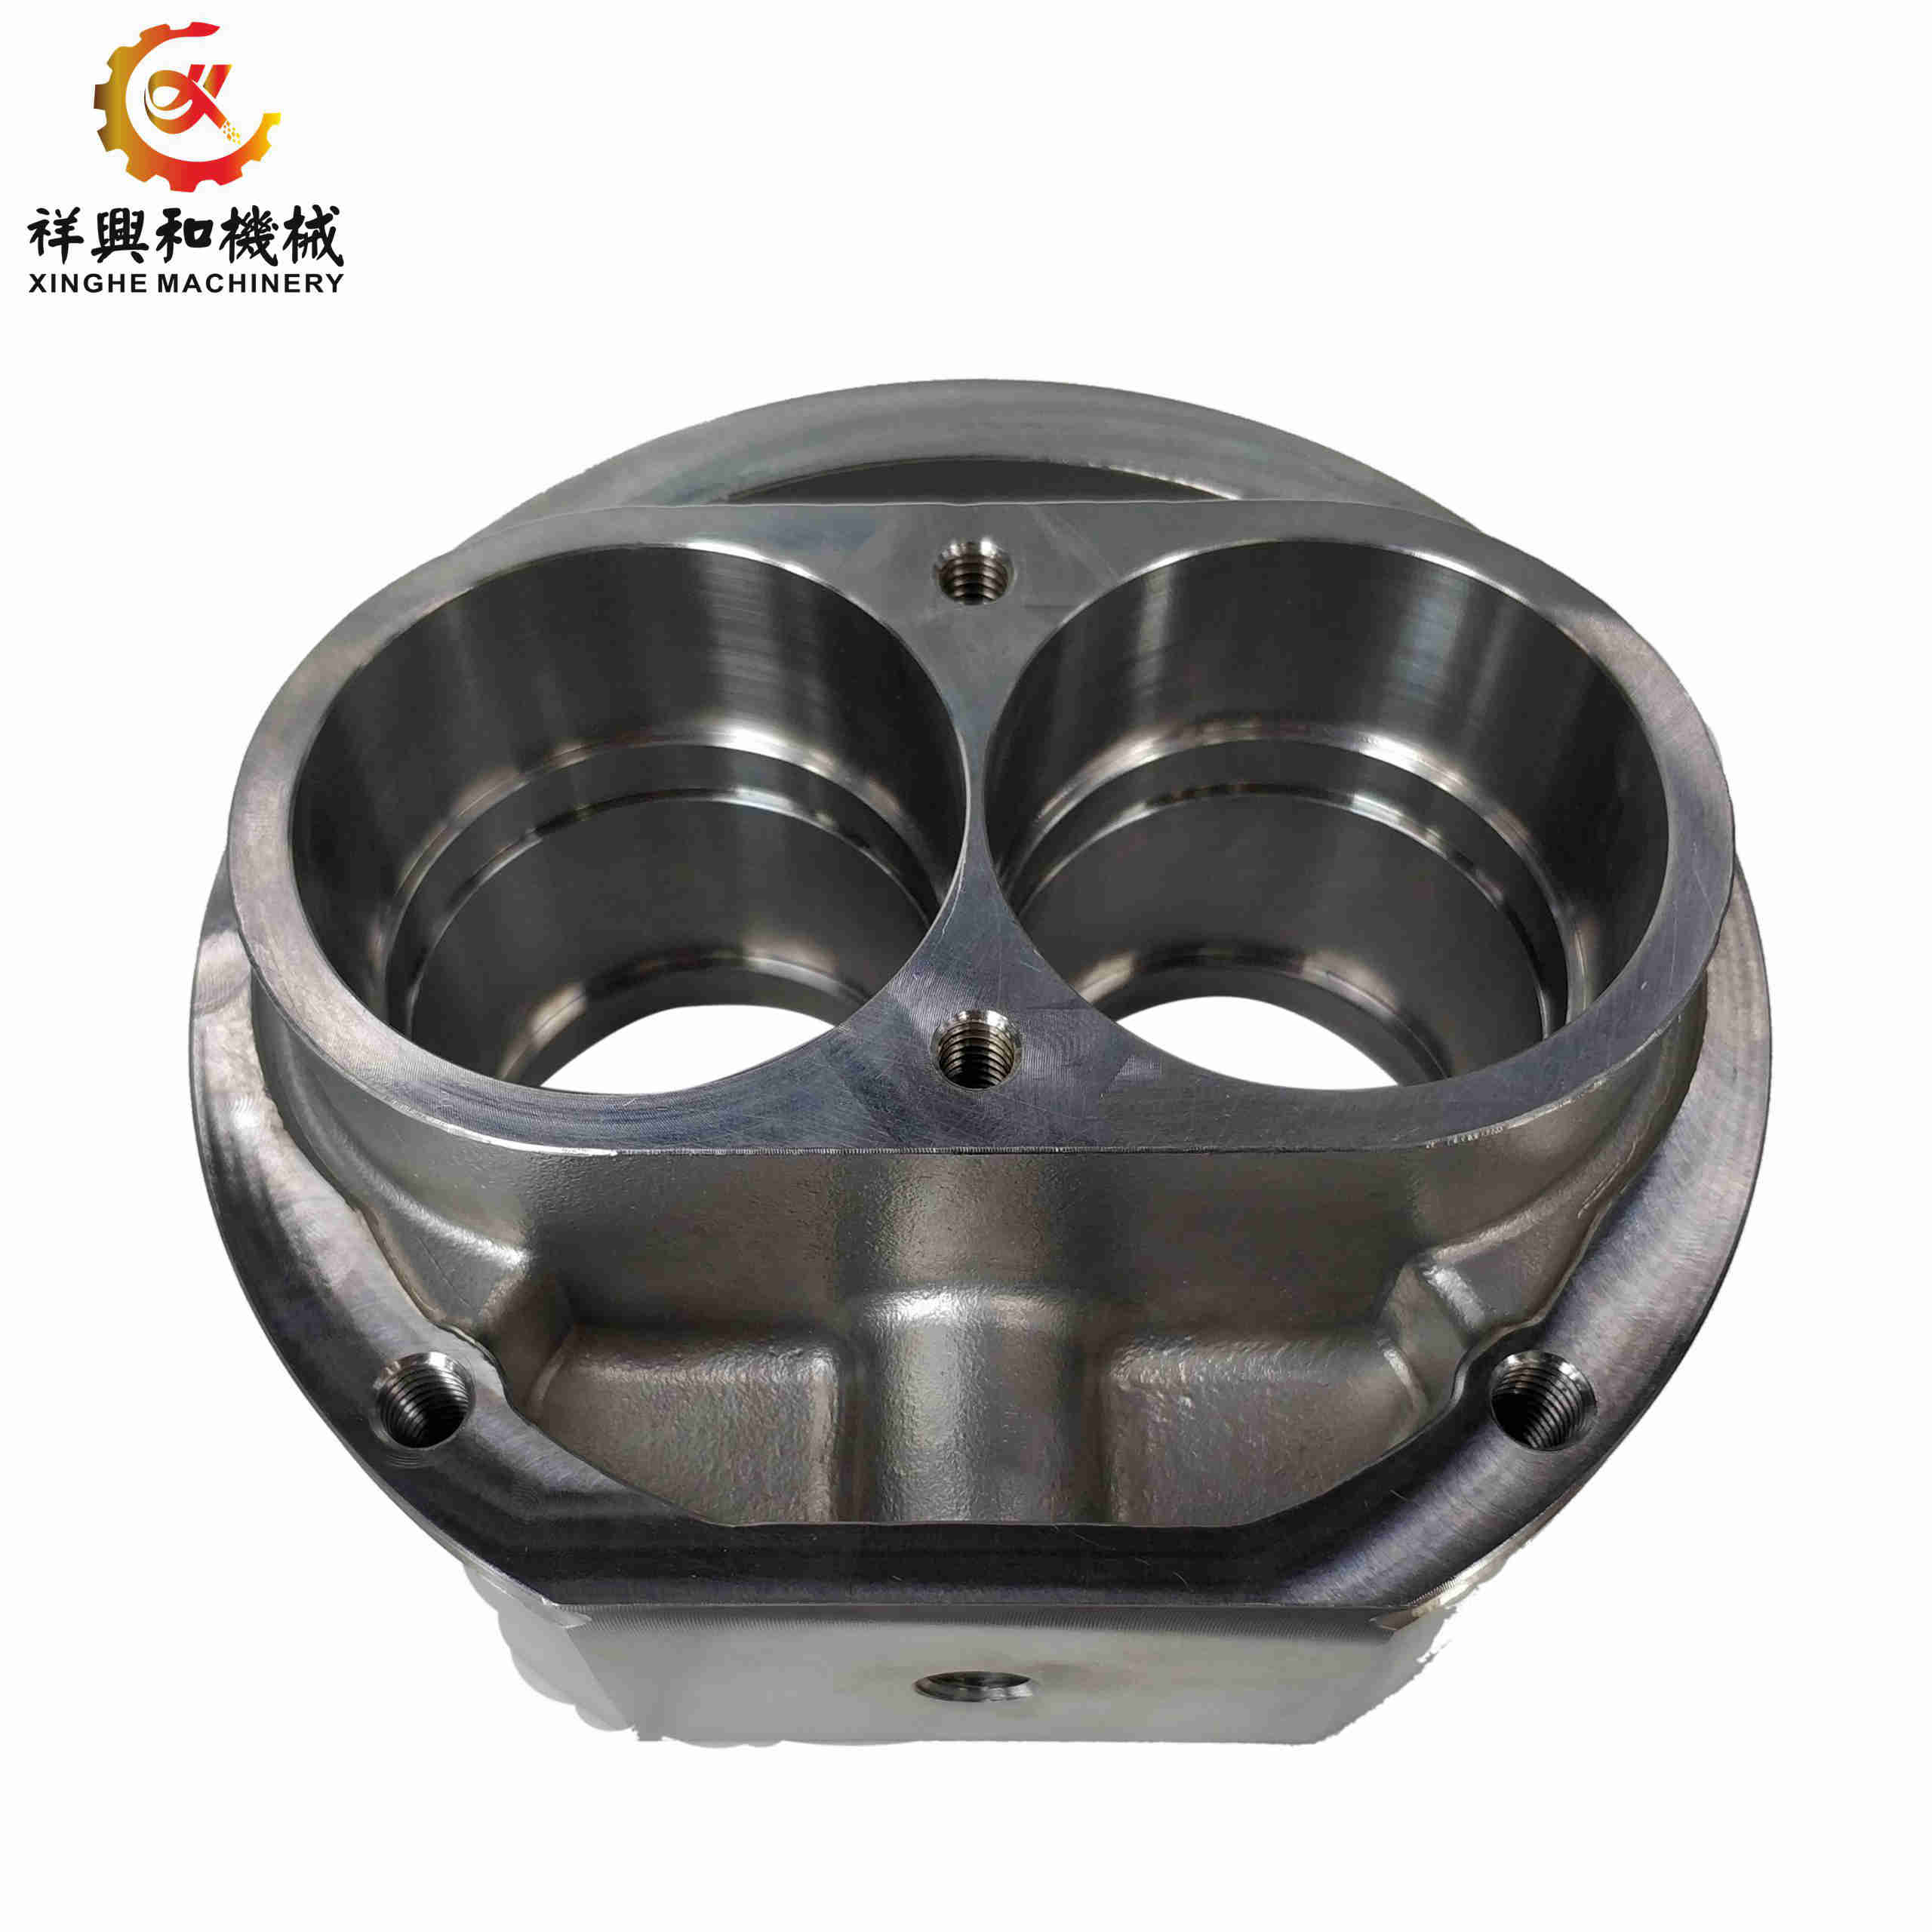 OEM 316L stainless steel lost wax casting machinery parts